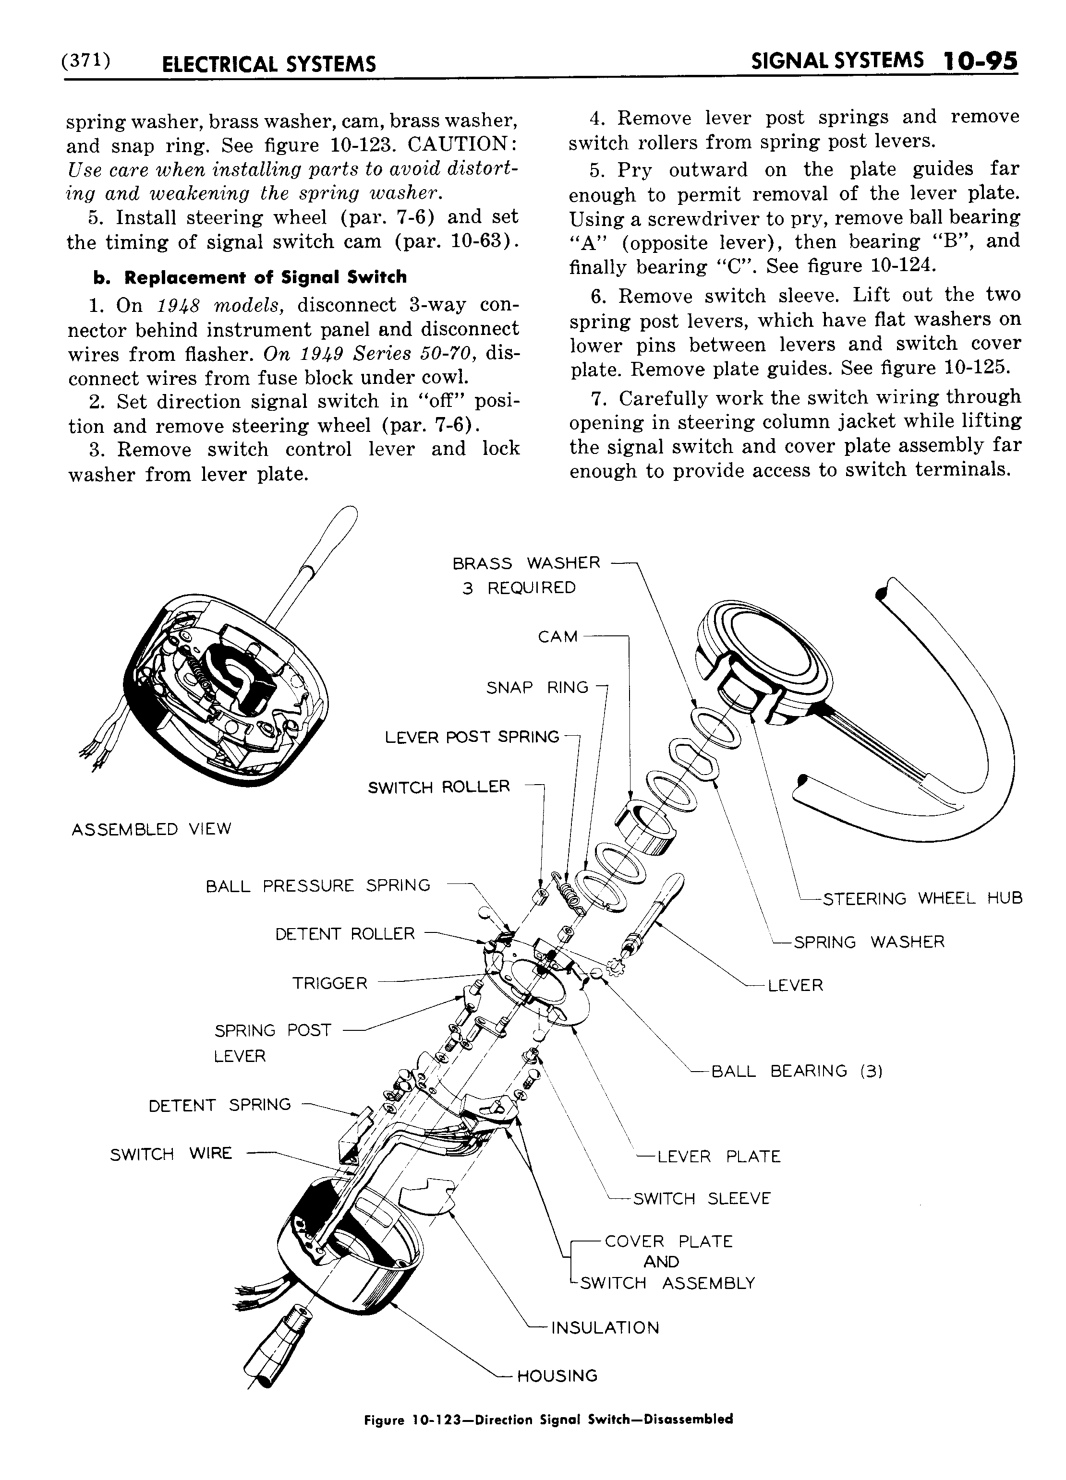 n_11 1948 Buick Shop Manual - Electrical Systems-095-095.jpg